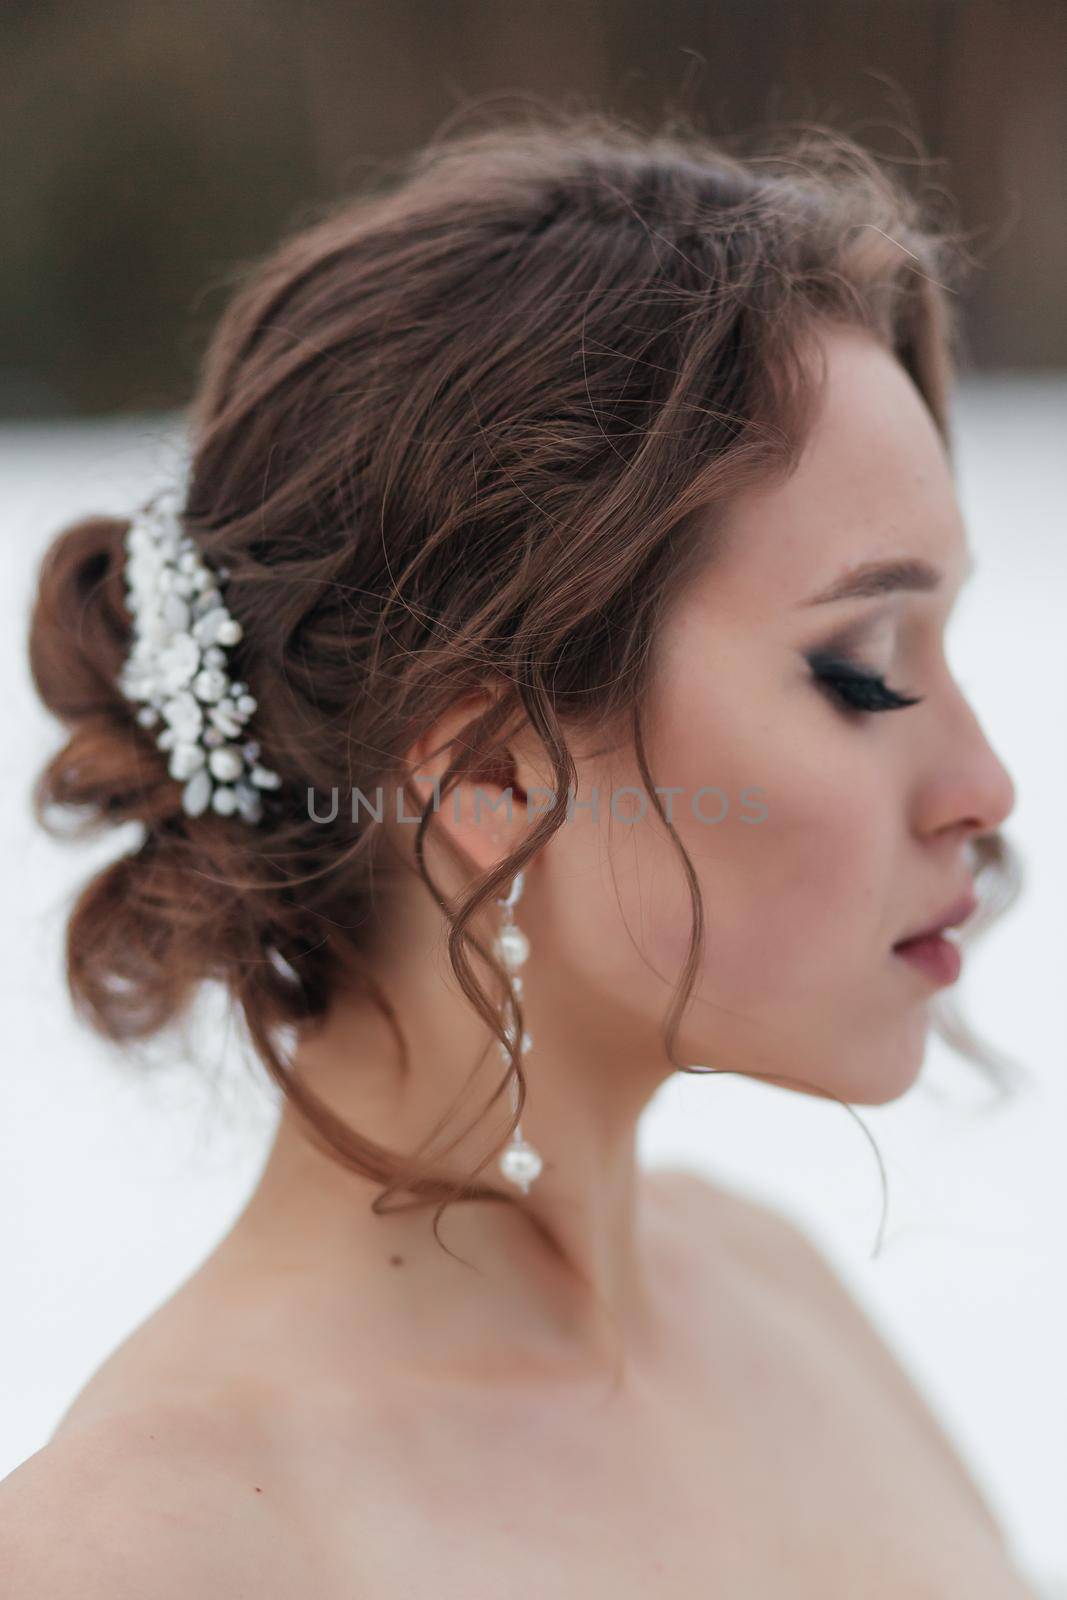 Wedding jewelry on the bride's head by deandy